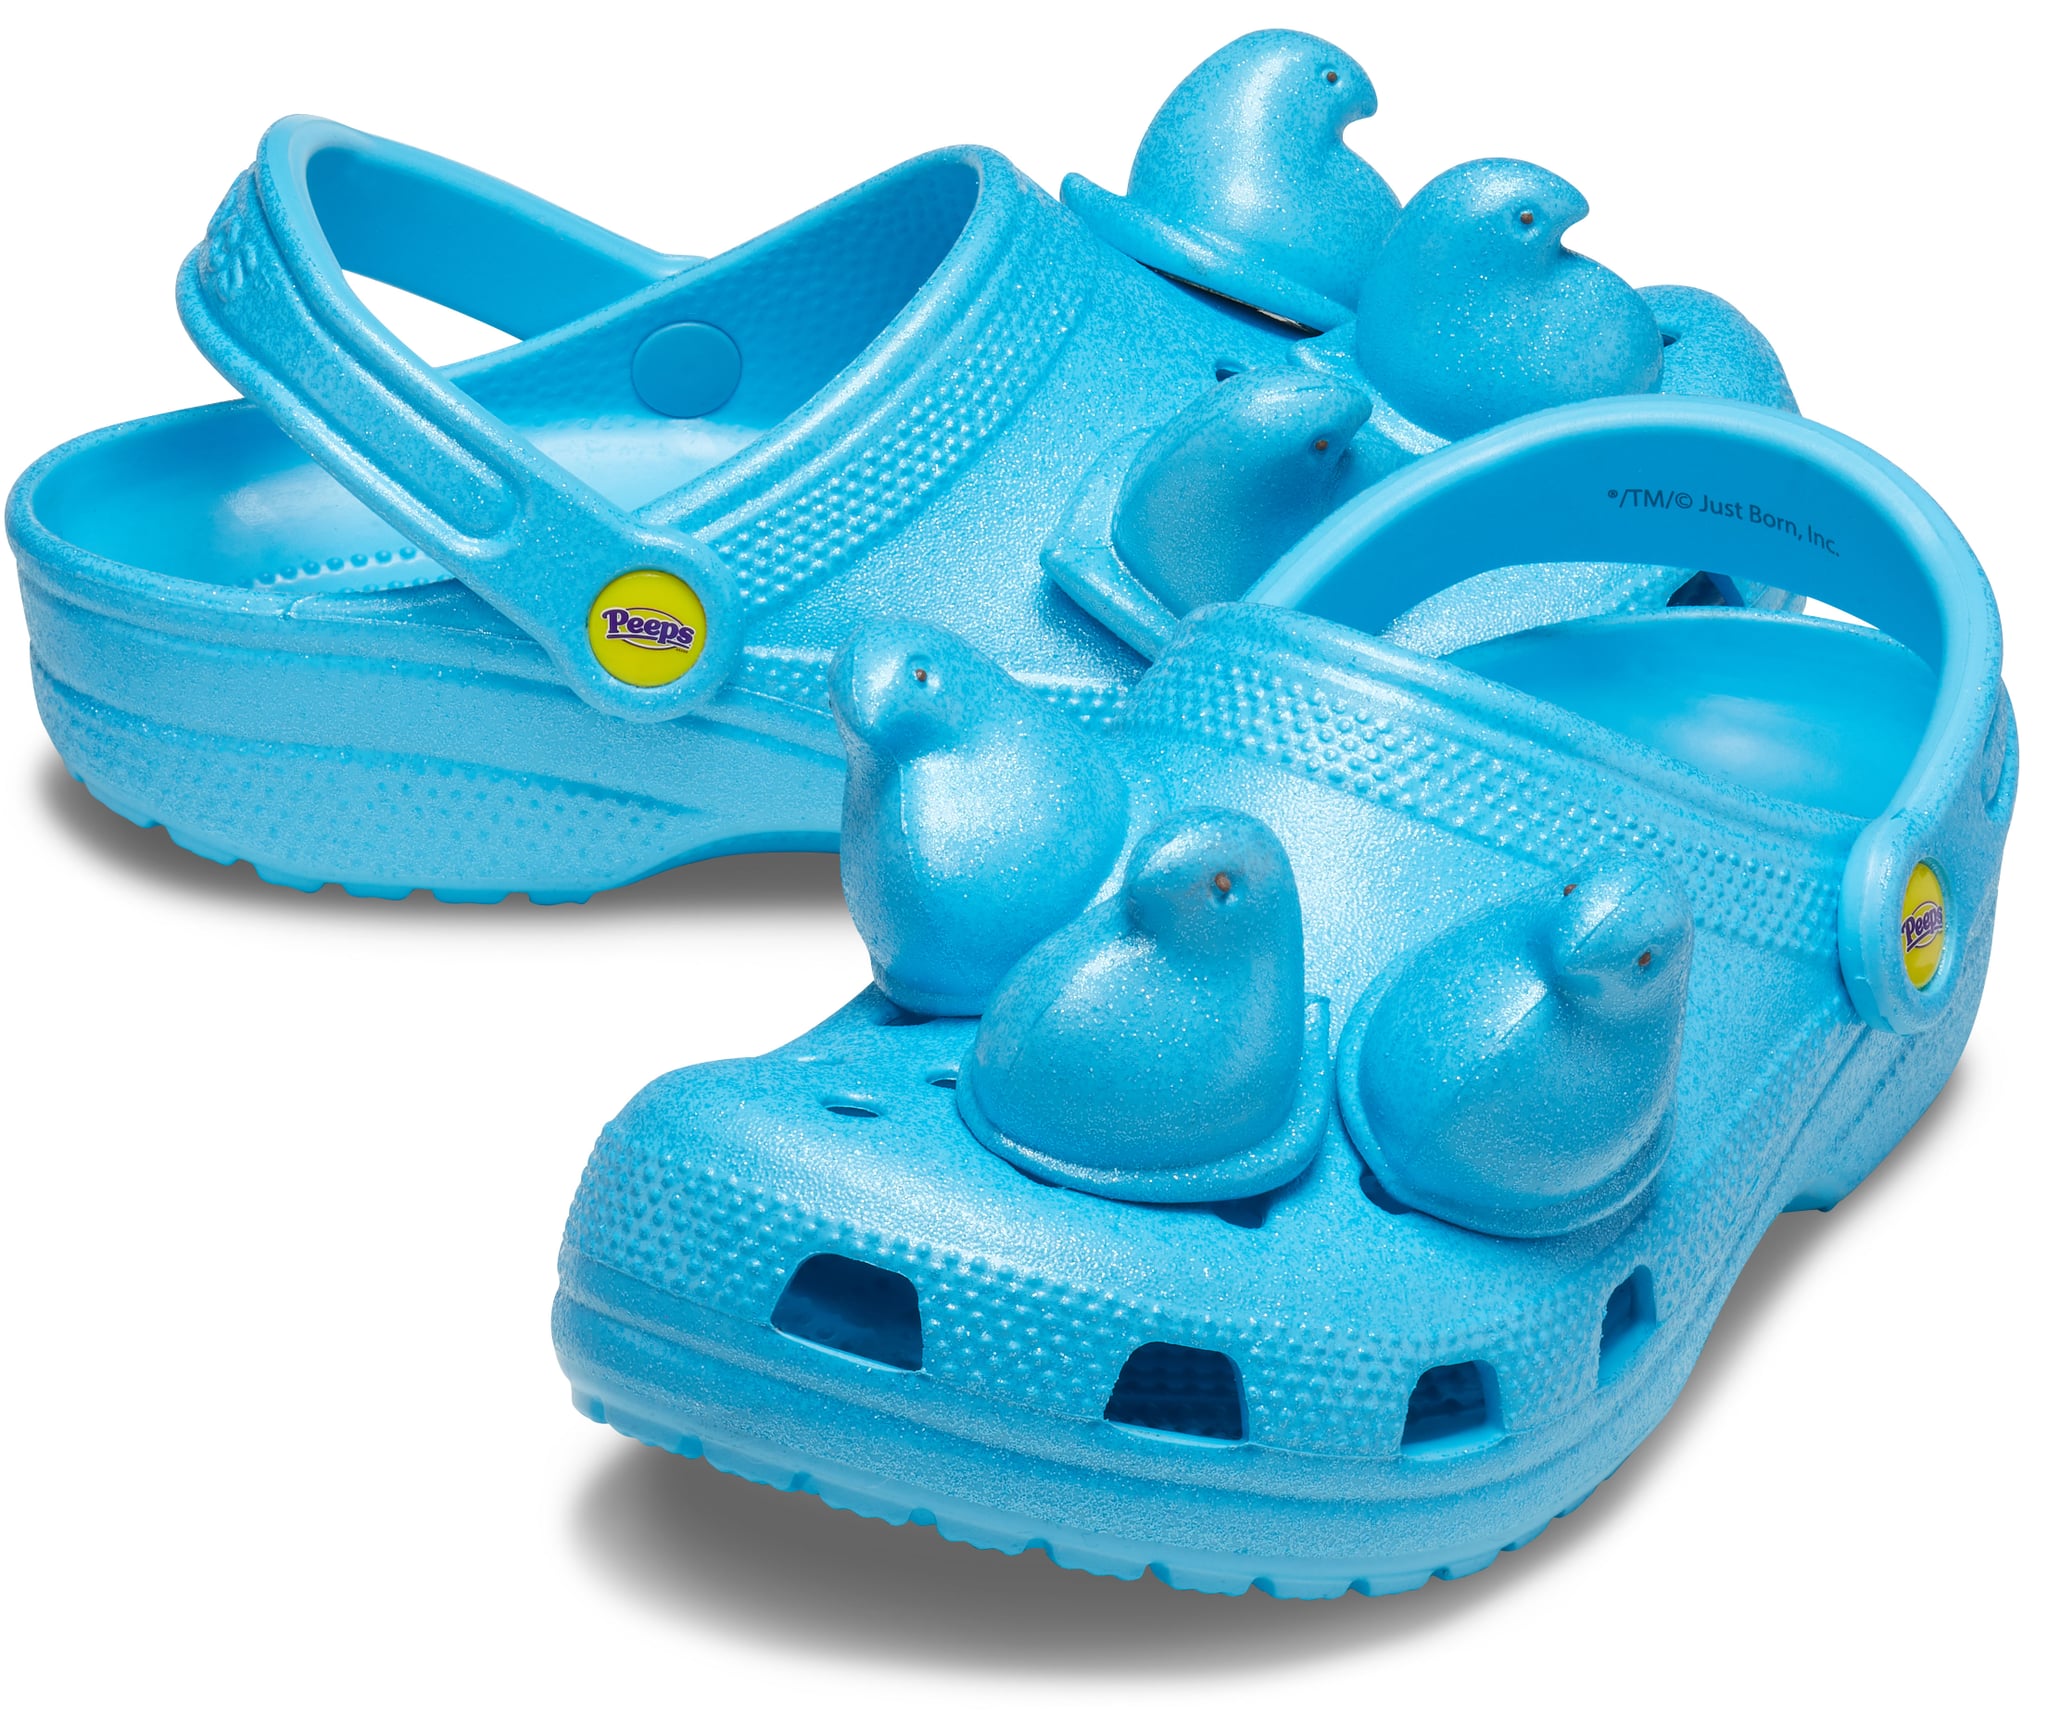 Buy the Peeps x Crocs Classic Clog in Blue | Peeps Crocs Are Now a Thing,  and I Have So Many Questions | POPSUGAR Food Photo 5